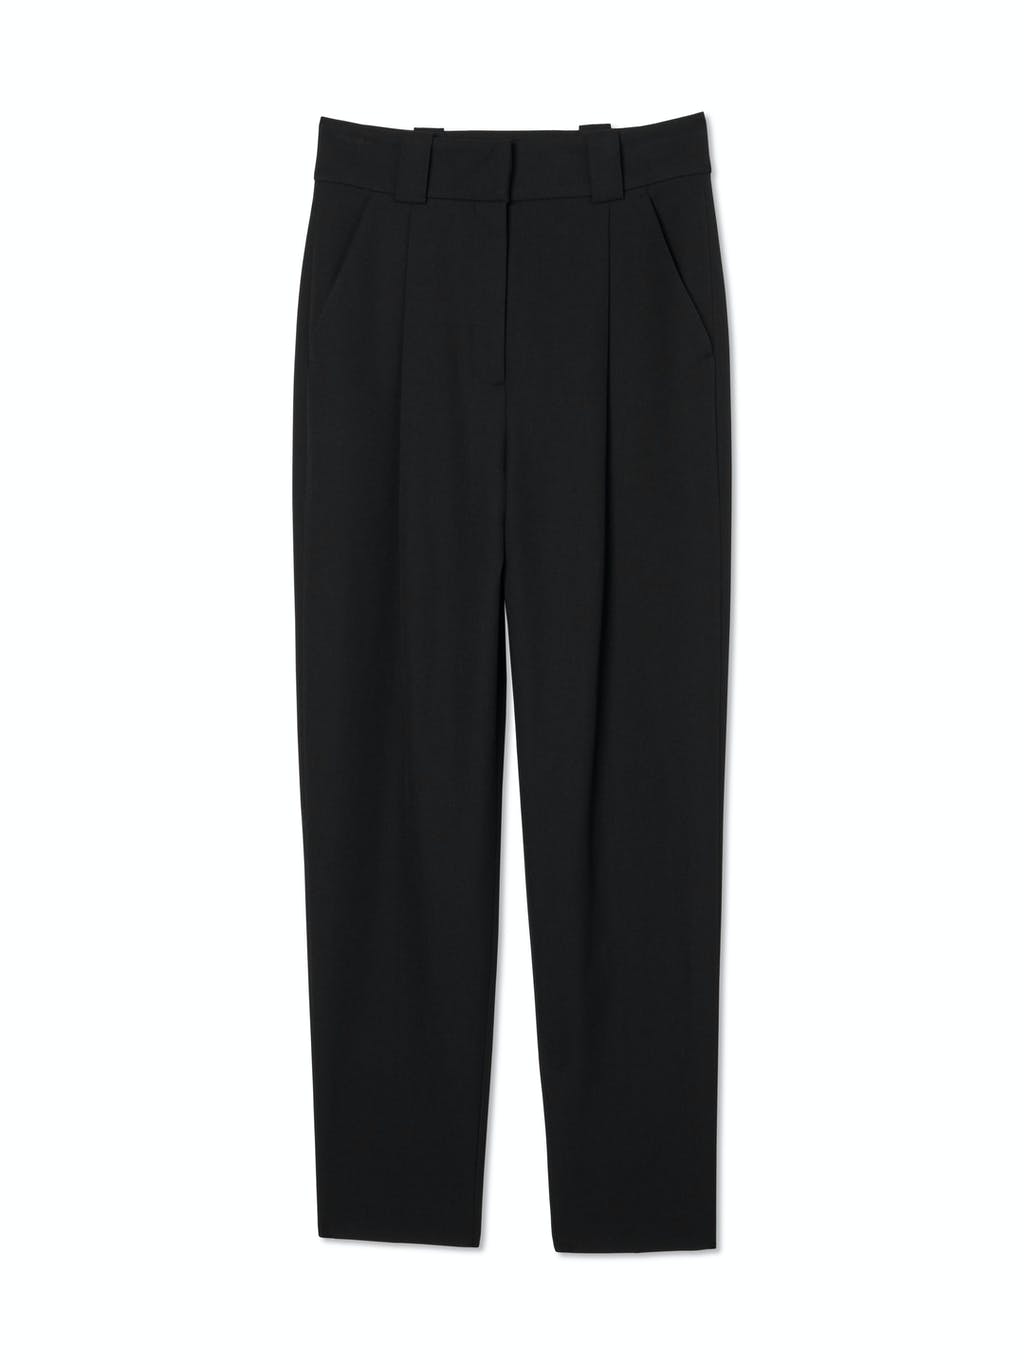 Collin Tailored Crepe Pant